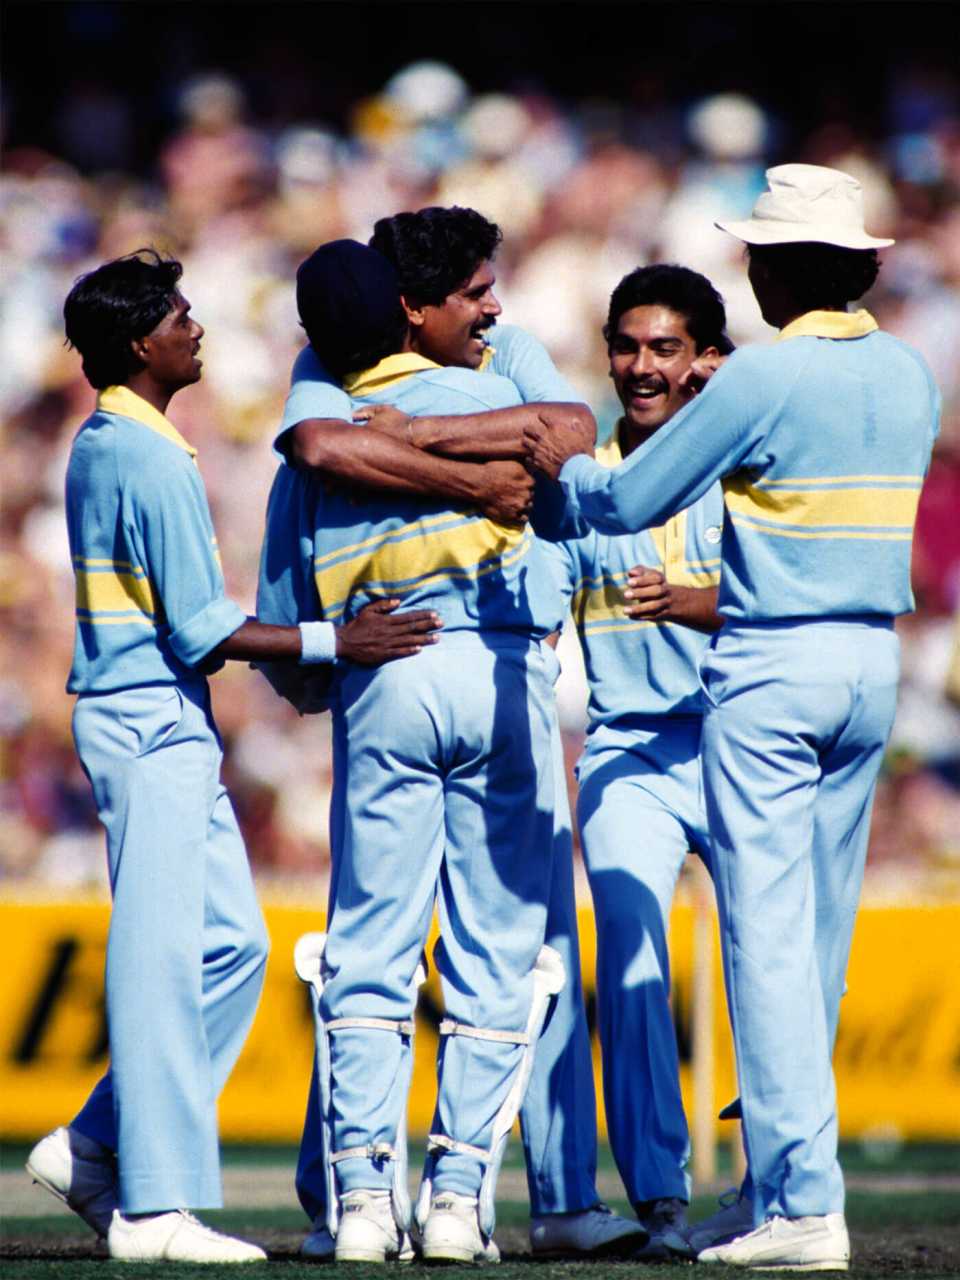 The Indians celebrate a wicket